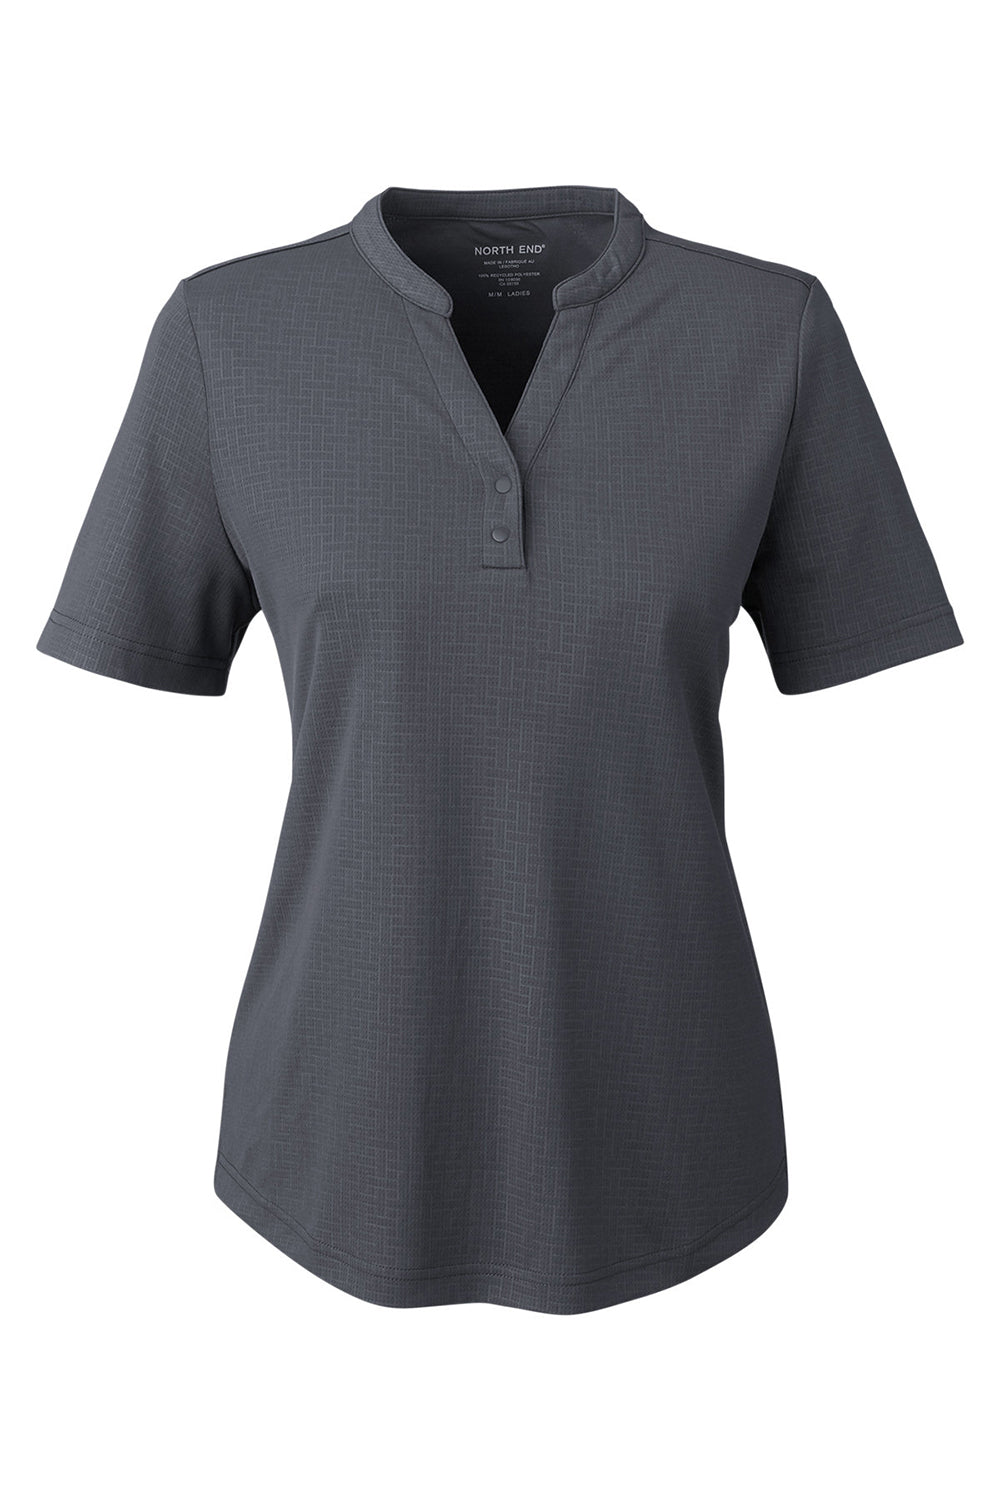 North End NE102W Grey Carbon Wicking Sleeve — Replay Recycled Short Moisture Womens Polo Shirt